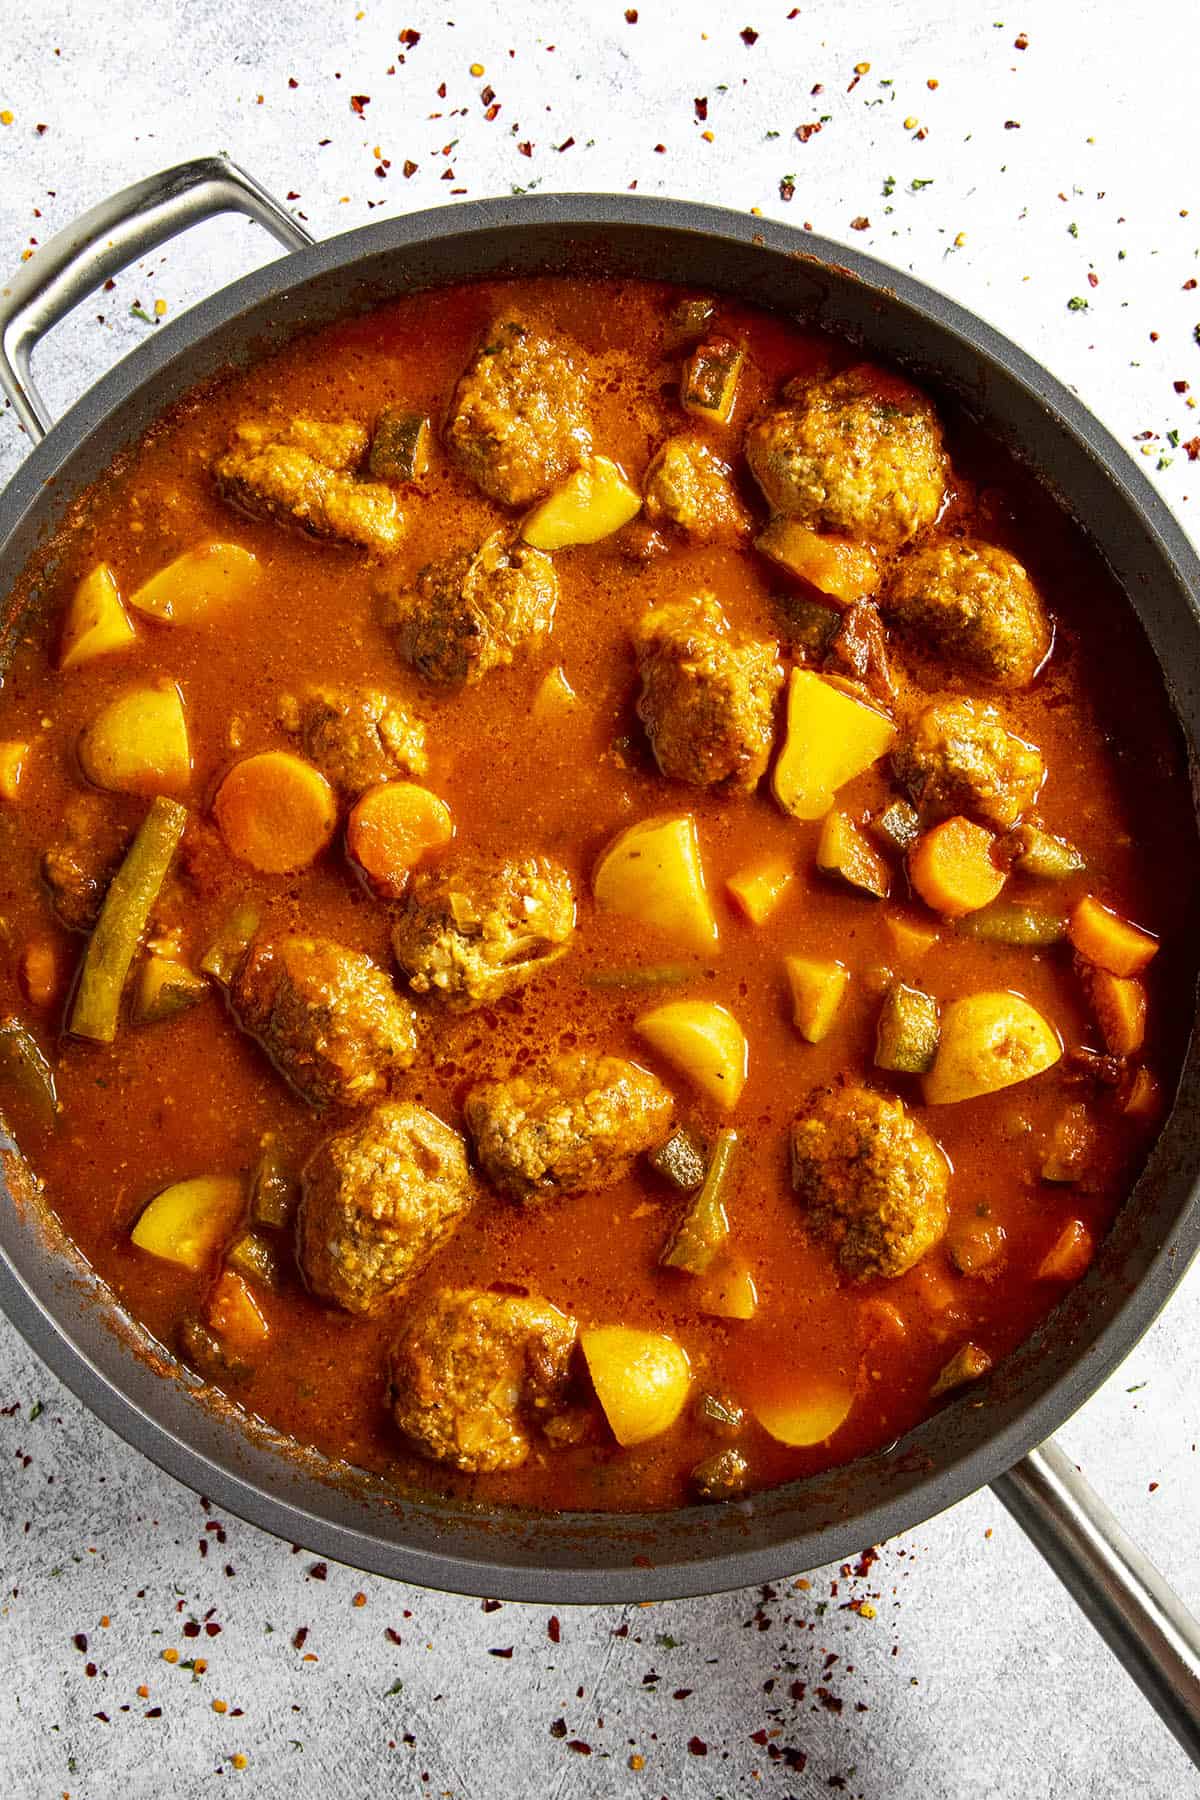 Simmering albondigas and vegetables in broth to make Albondigas Soup